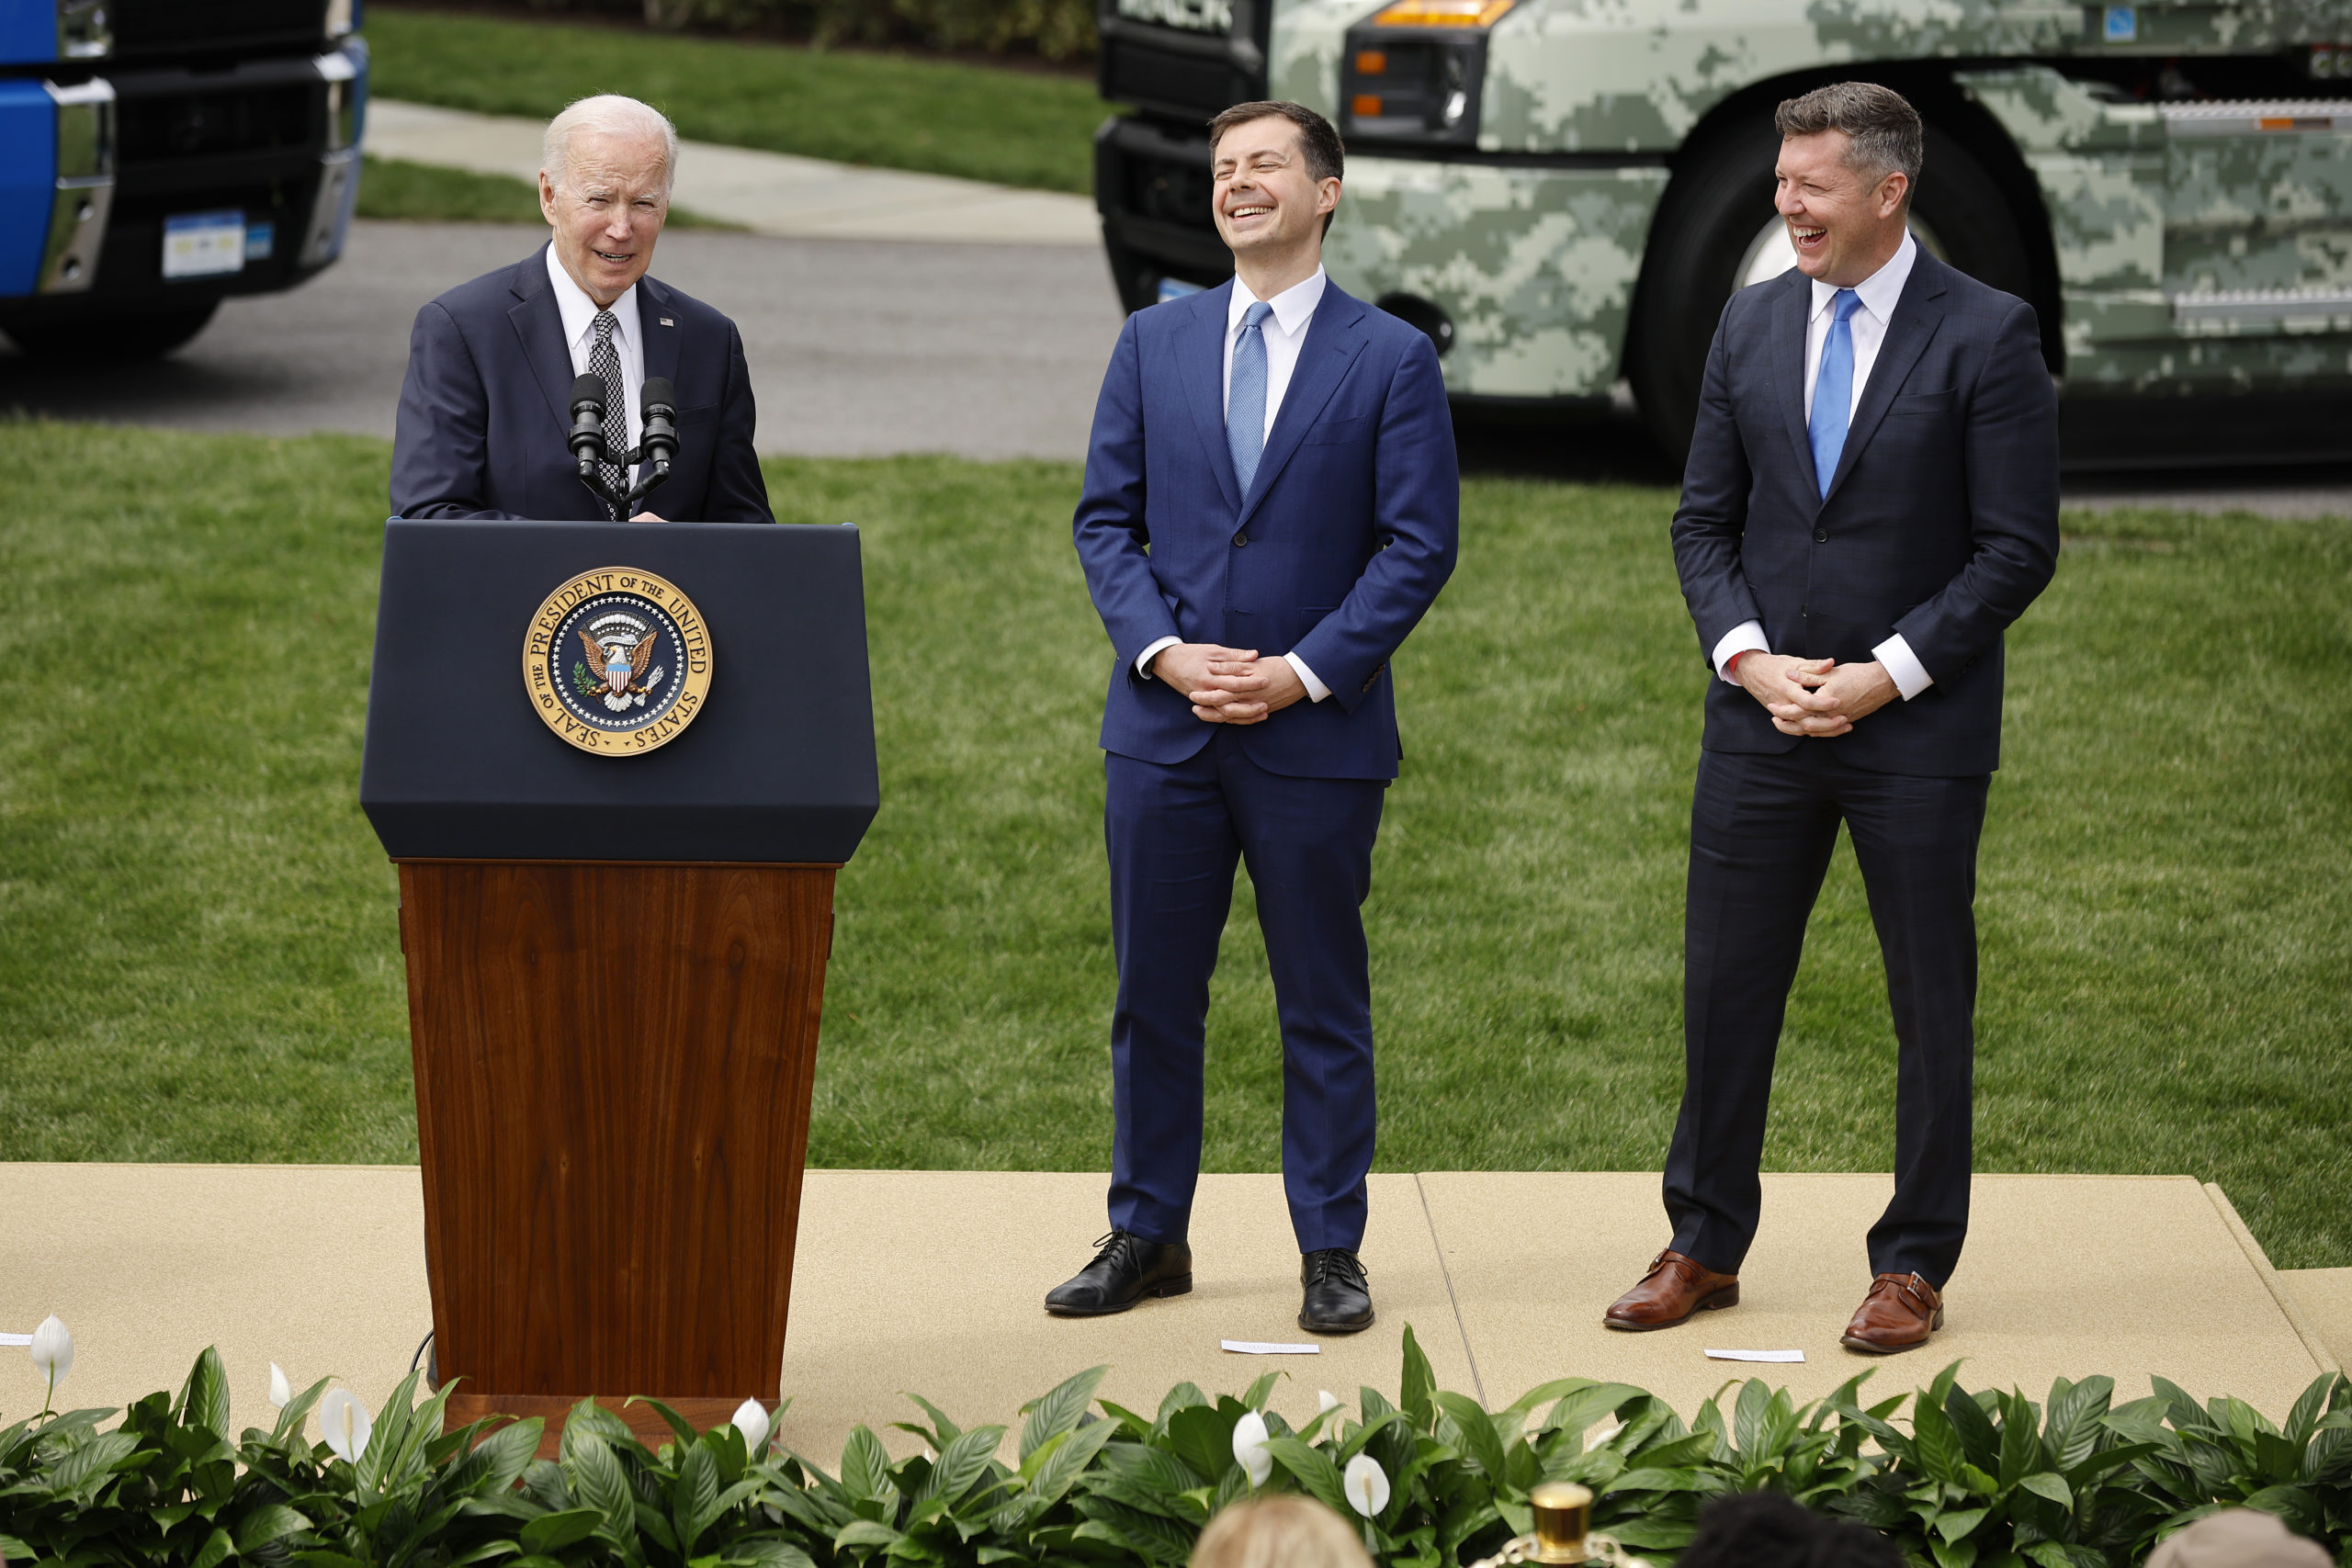 WASHINGTON, DC - APRIL 04: U.S. President Joe Biden (L) delivers remarks on his 'Trucking Action Plan' with Transportation Secretary Pete Buttigieg and Veterans Trucking Task Force Chair Patrick Murphy (R) on the South Lawn of the White House on April 04, 2022 in Washington, DC. Chip Somodevilla/Getty Images